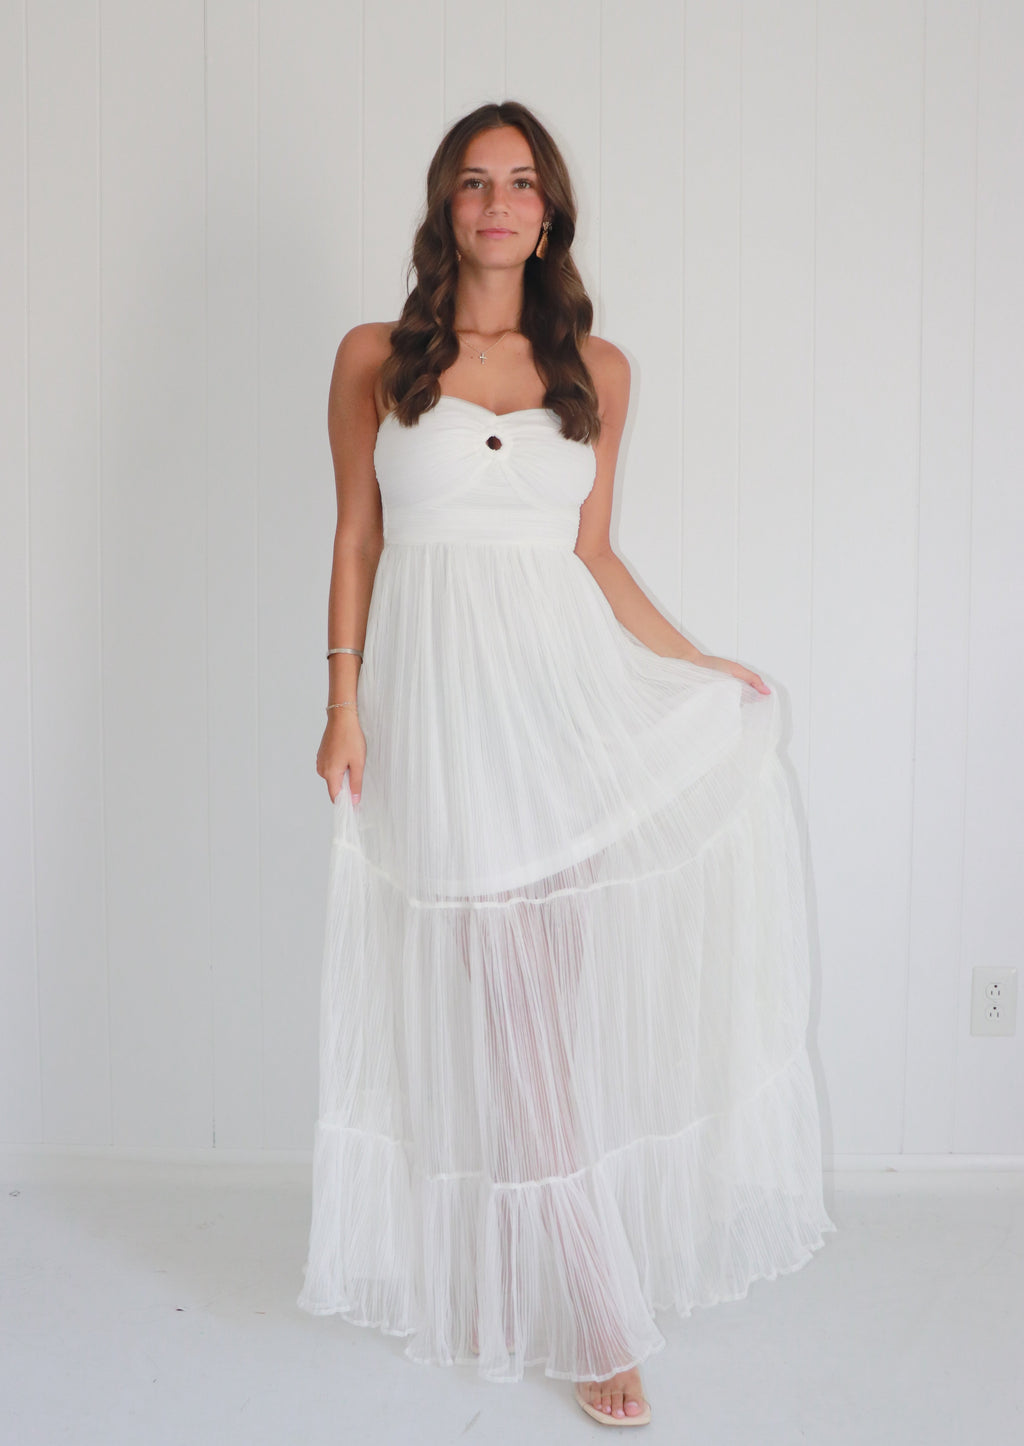 Wifey Material Strapless Maxi Dress